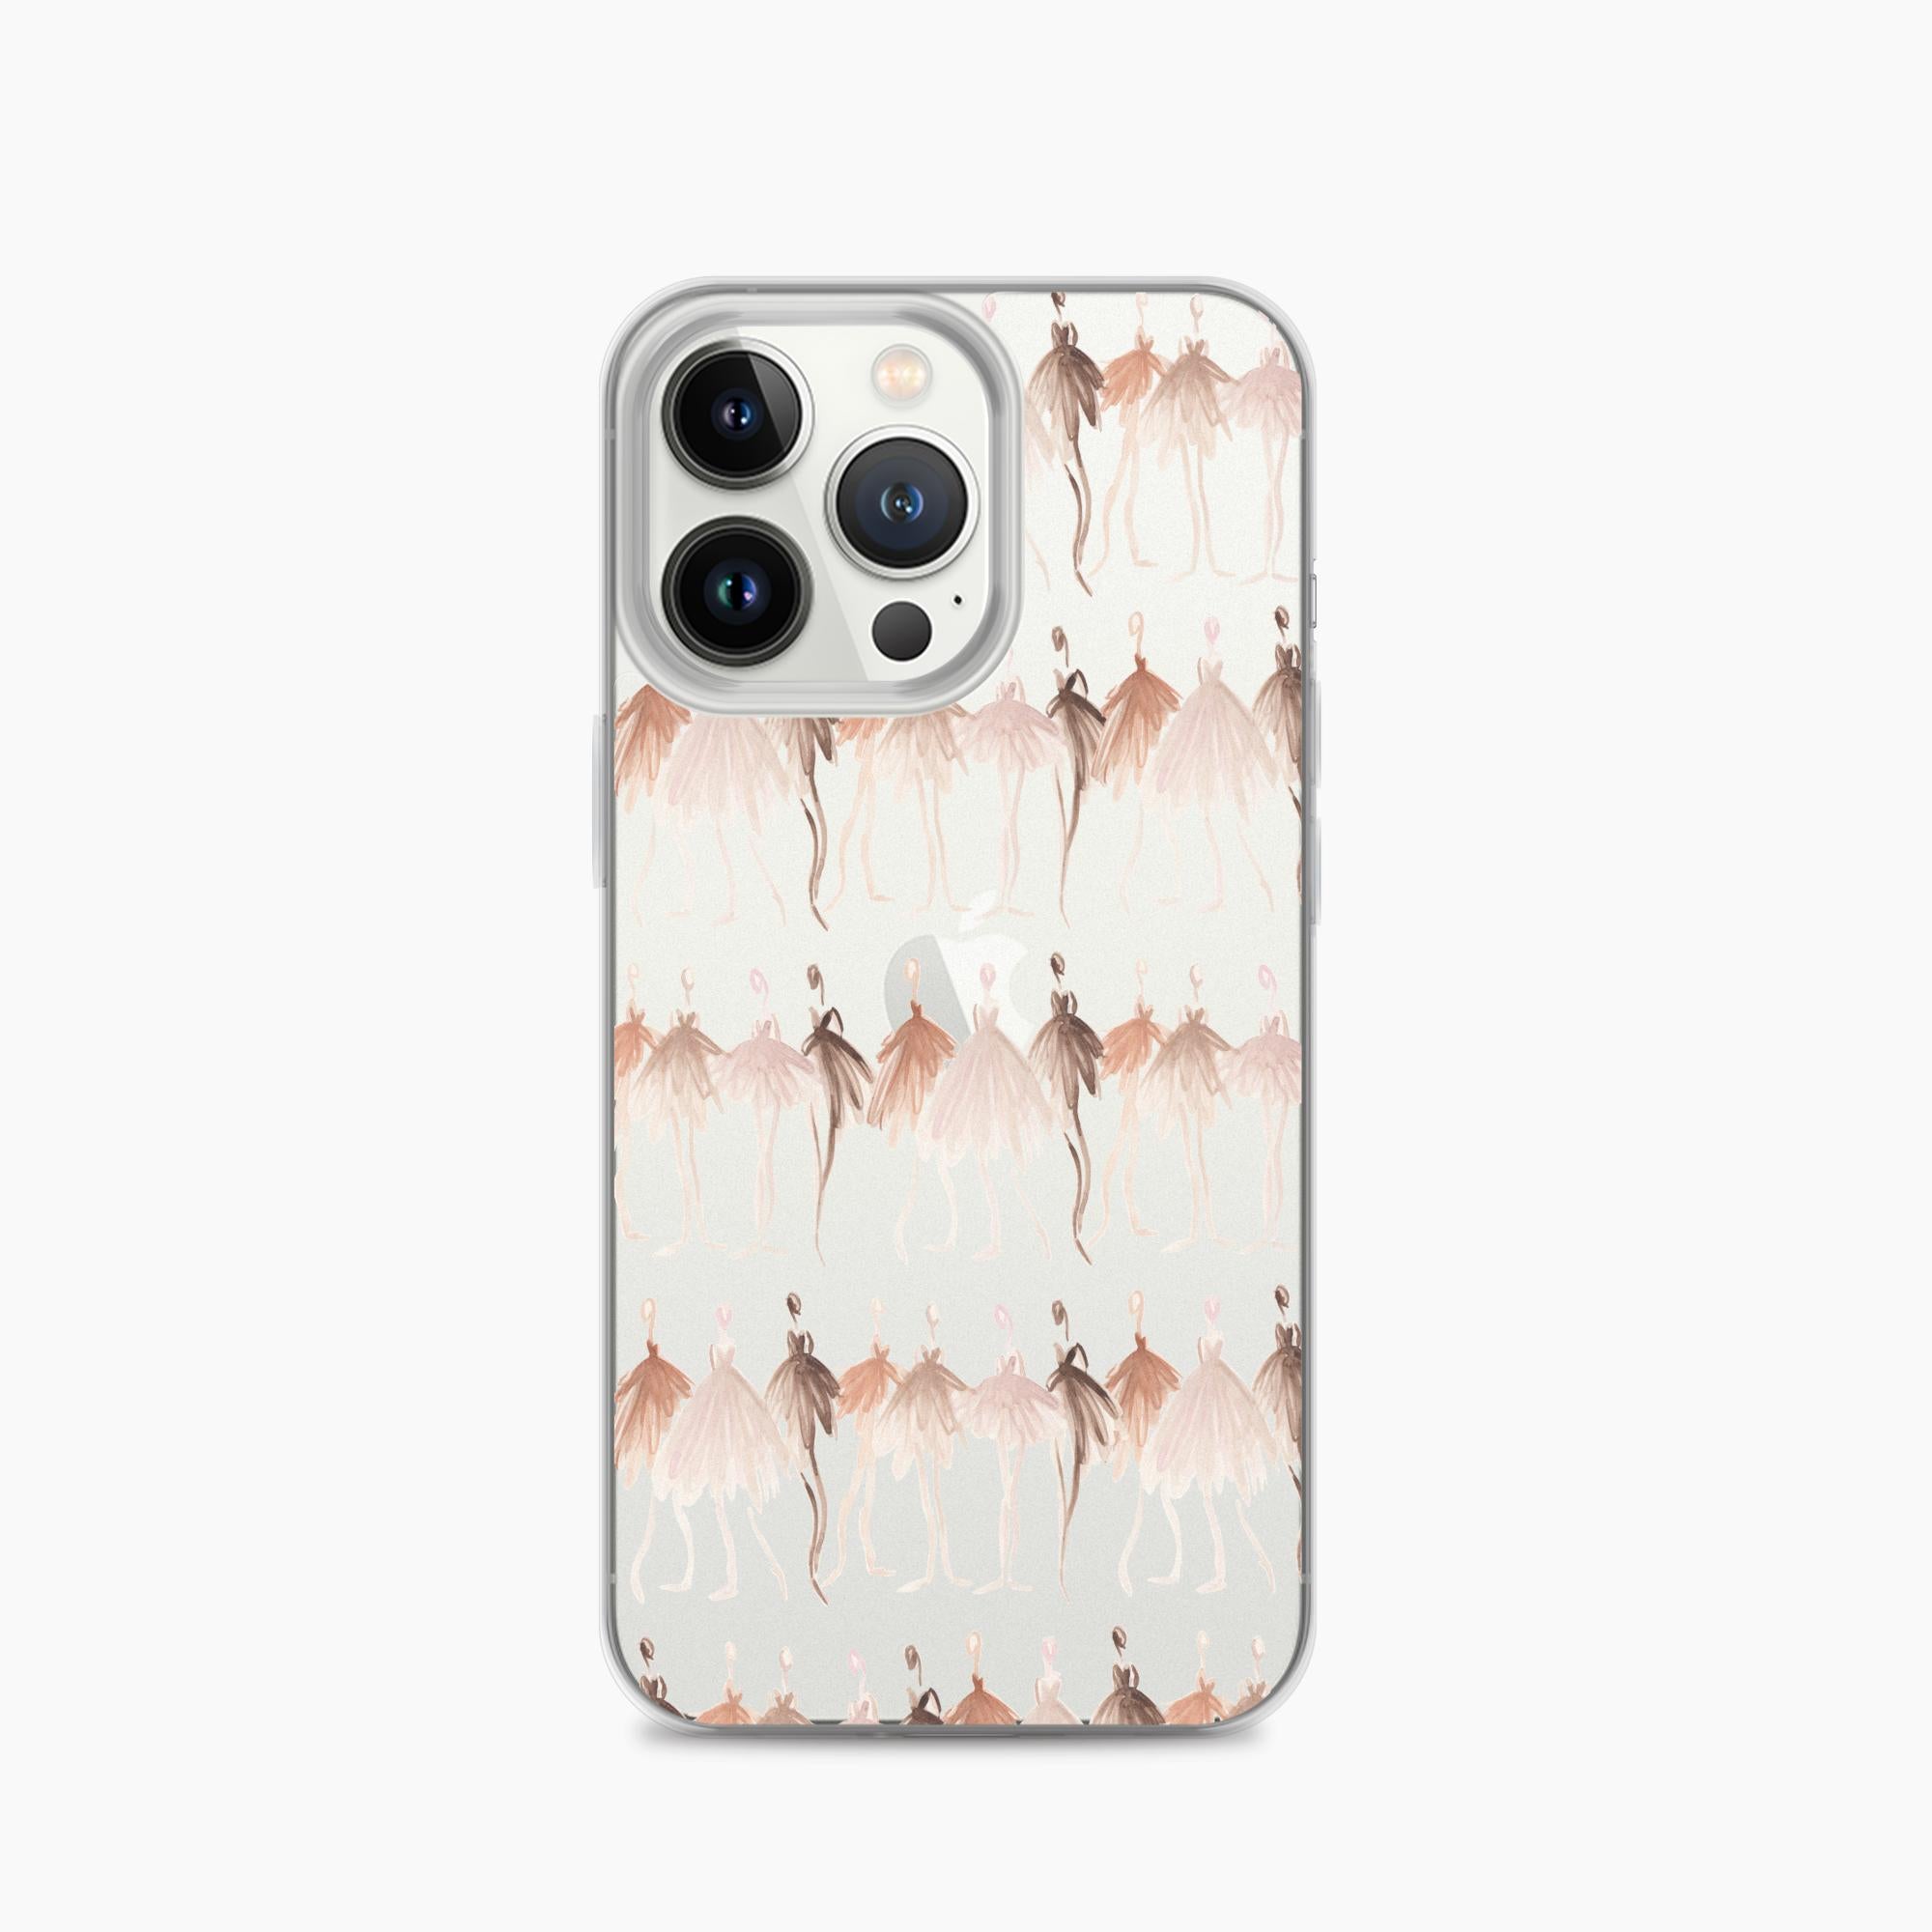 Colors of Ballet iPhone Case